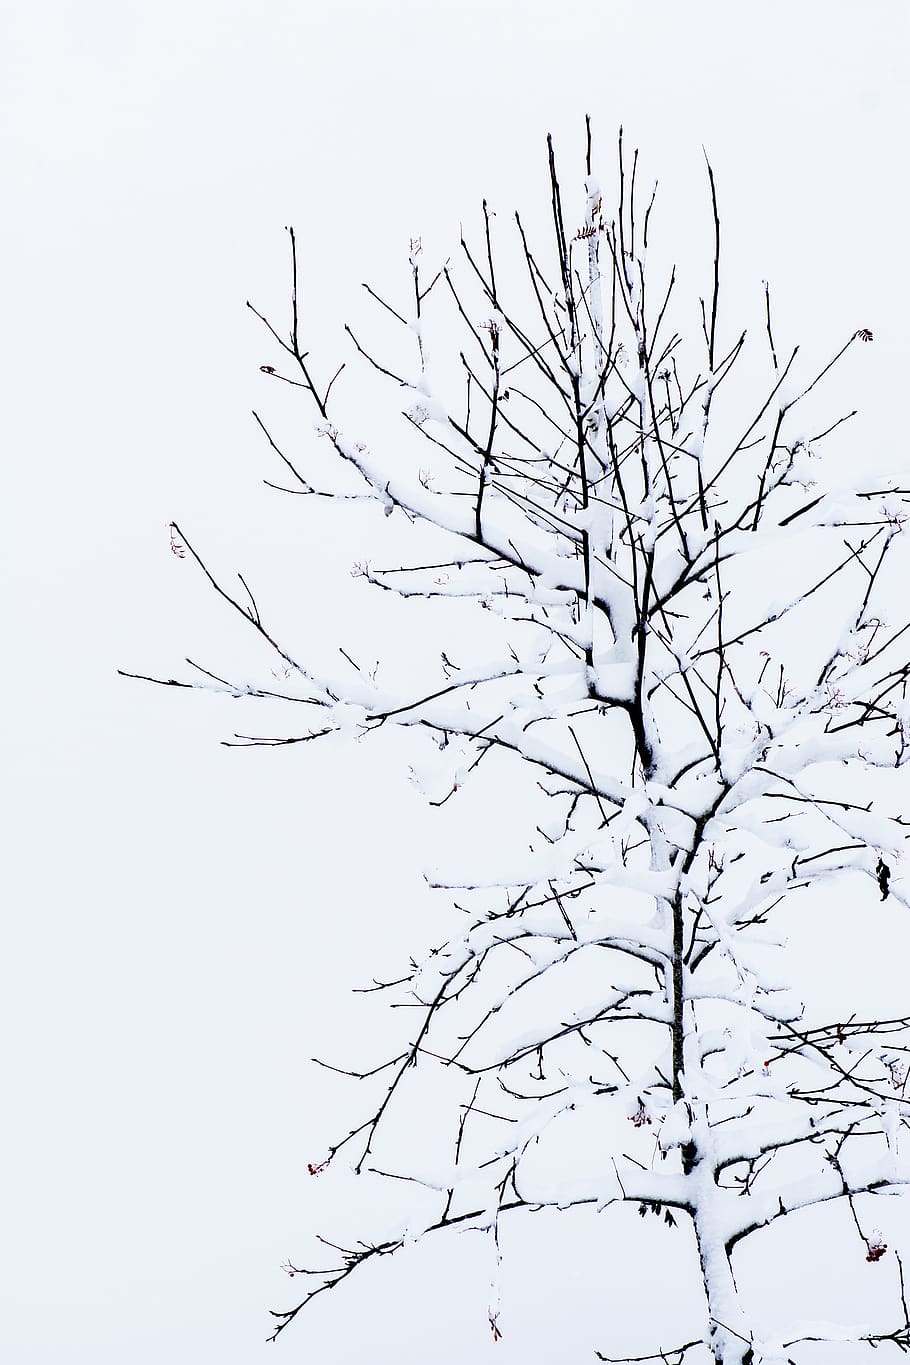 tree, kahl, winter, without leaves, snow, snowy, karg, aesthetic, nature, sky